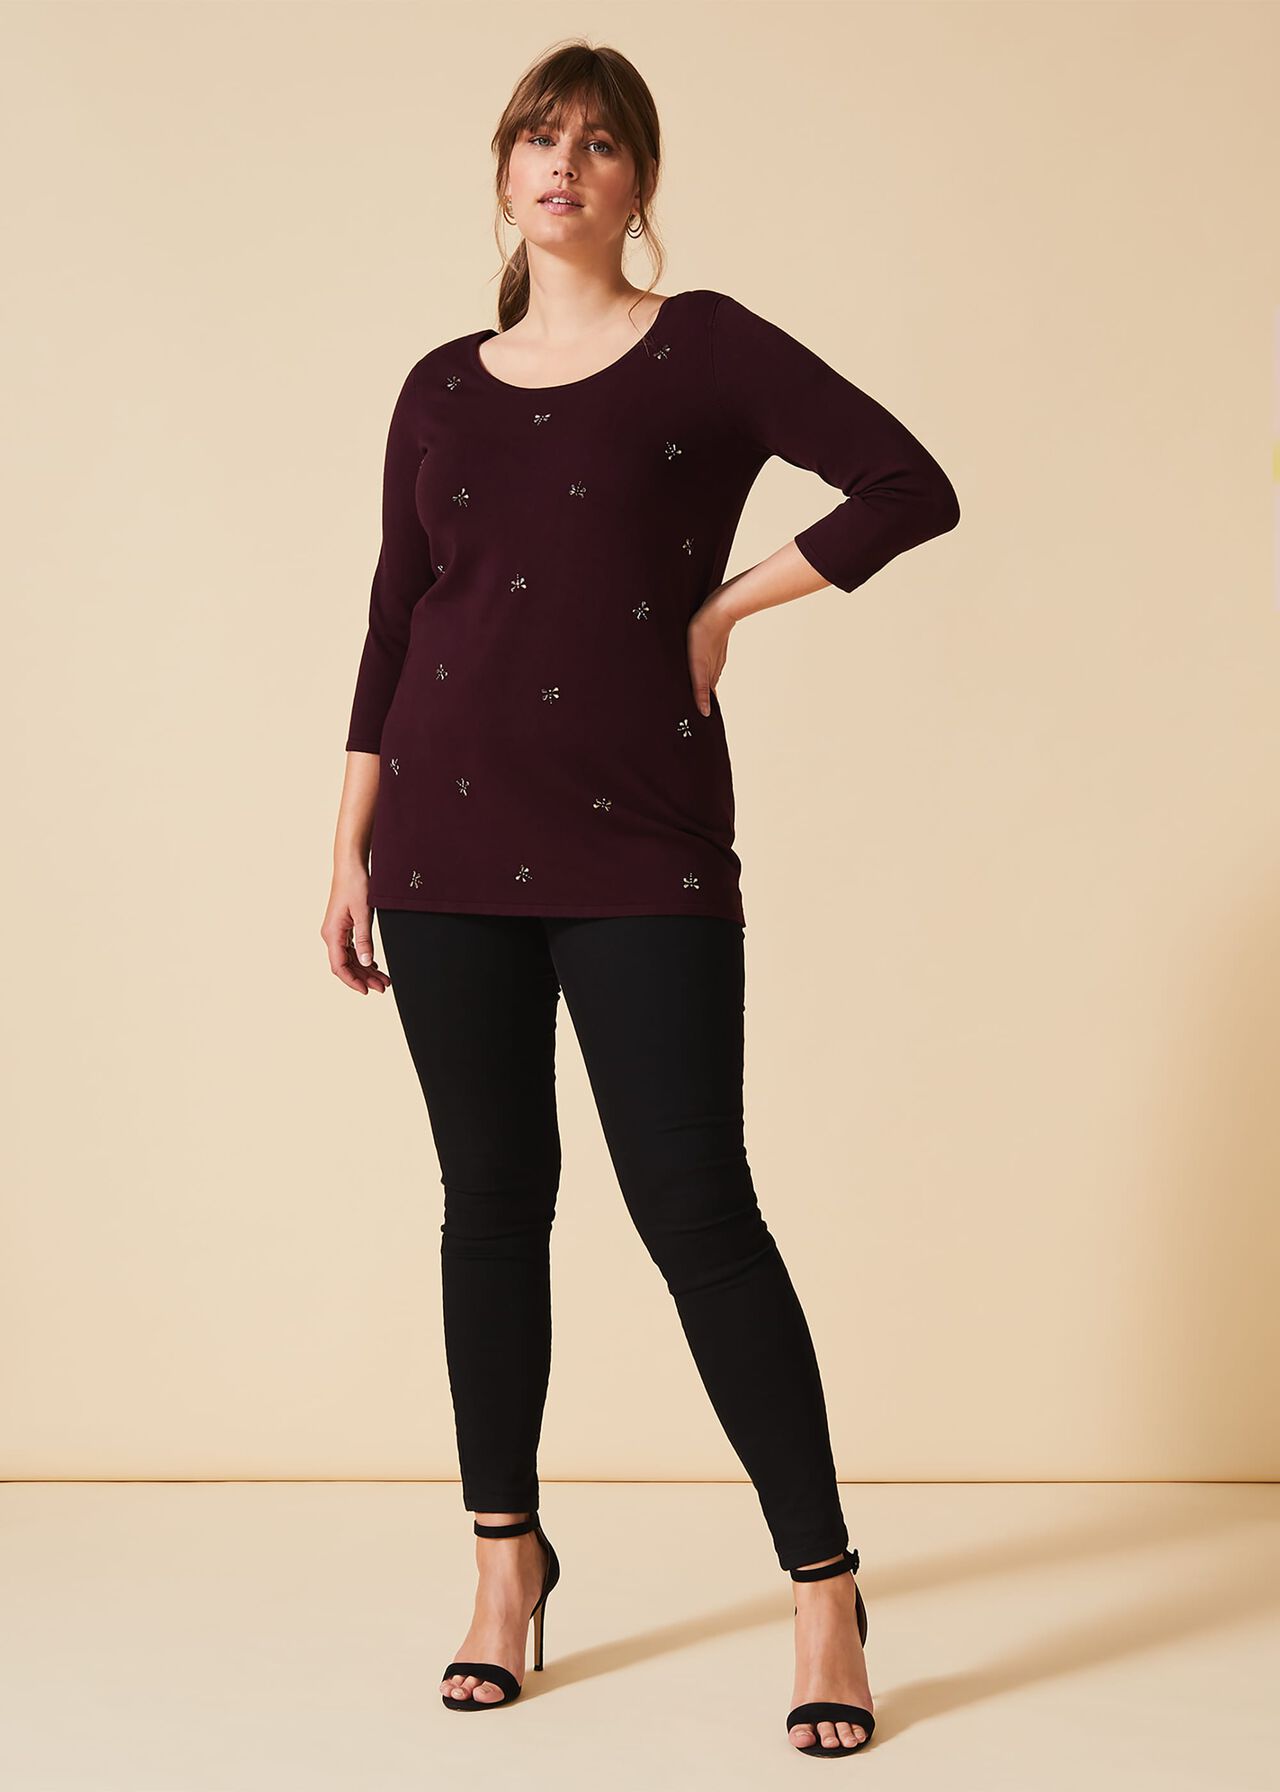 Danielle Dragonfly Knit Top